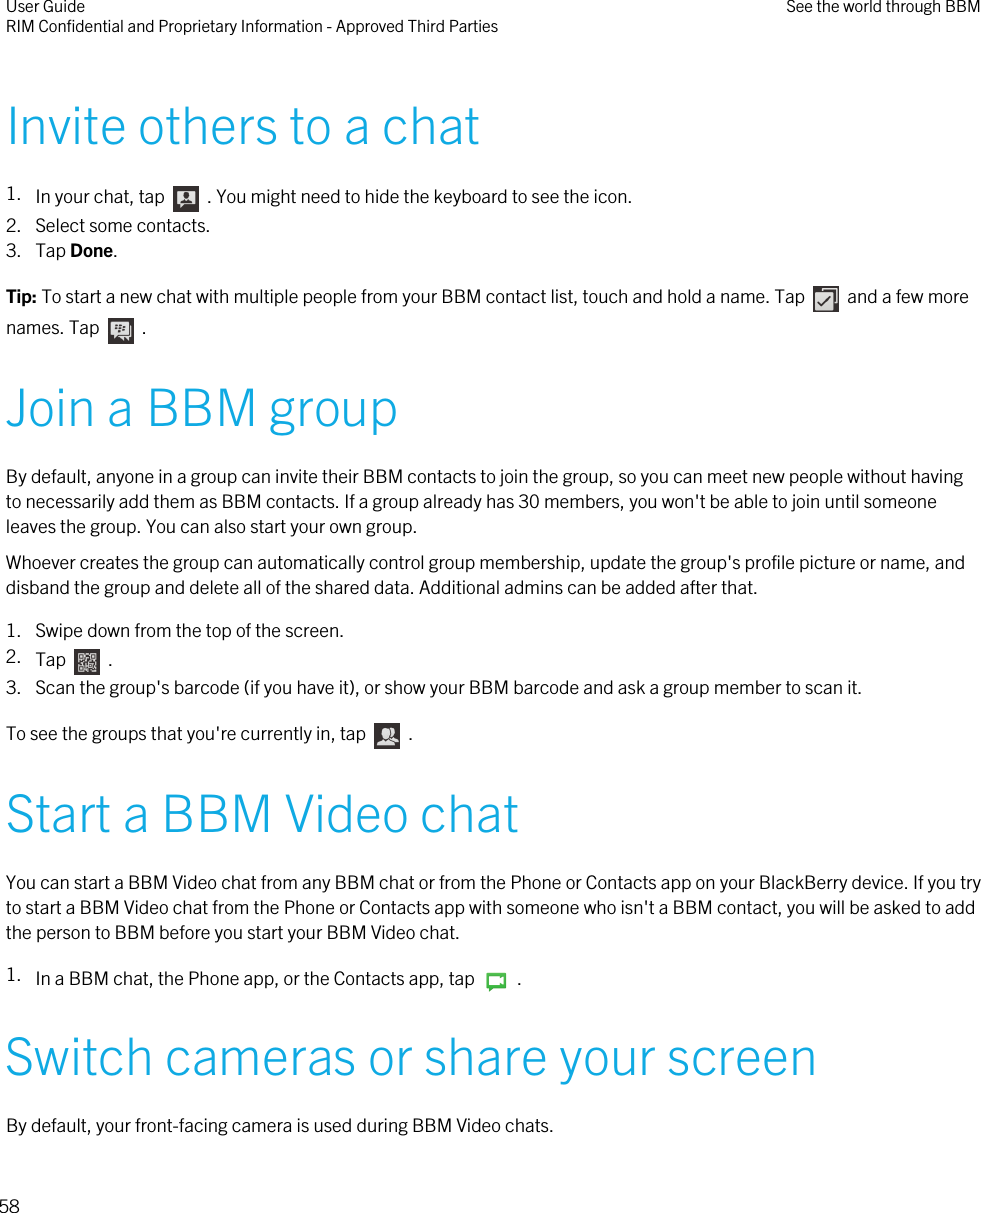 Invite others to a chat1. In your chat, tap    . You might need to hide the keyboard to see the icon.2. Select some contacts.3. Tap Done.Tip: To start a new chat with multiple people from your BBM contact list, touch and hold a name. Tap    and a few morenames. Tap    .Join a BBM groupBy default, anyone in a group can invite their BBM contacts to join the group, so you can meet new people without havingto necessarily add them as BBM contacts. If a group already has 30 members, you won&apos;t be able to join until someoneleaves the group. You can also start your own group.Whoever creates the group can automatically control group membership, update the group&apos;s profile picture or name, anddisband the group and delete all of the shared data. Additional admins can be added after that.1. Swipe down from the top of the screen.2. Tap    .3. Scan the group&apos;s barcode (if you have it), or show your BBM barcode and ask a group member to scan it.To see the groups that you&apos;re currently in, tap    .Start a BBM Video chatYou can start a BBM Video chat from any BBM chat or from the Phone or Contacts app on your BlackBerry device. If you tryto start a BBM Video chat from the Phone or Contacts app with someone who isn&apos;t a BBM contact, you will be asked to addthe person to BBM before you start your BBM Video chat.1. In a BBM chat, the Phone app, or the Contacts app, tap    .Switch cameras or share your screenBy default, your front-facing camera is used during BBM Video chats.User GuideRIM Confidential and Proprietary Information - Approved Third Parties See the world through BBM58